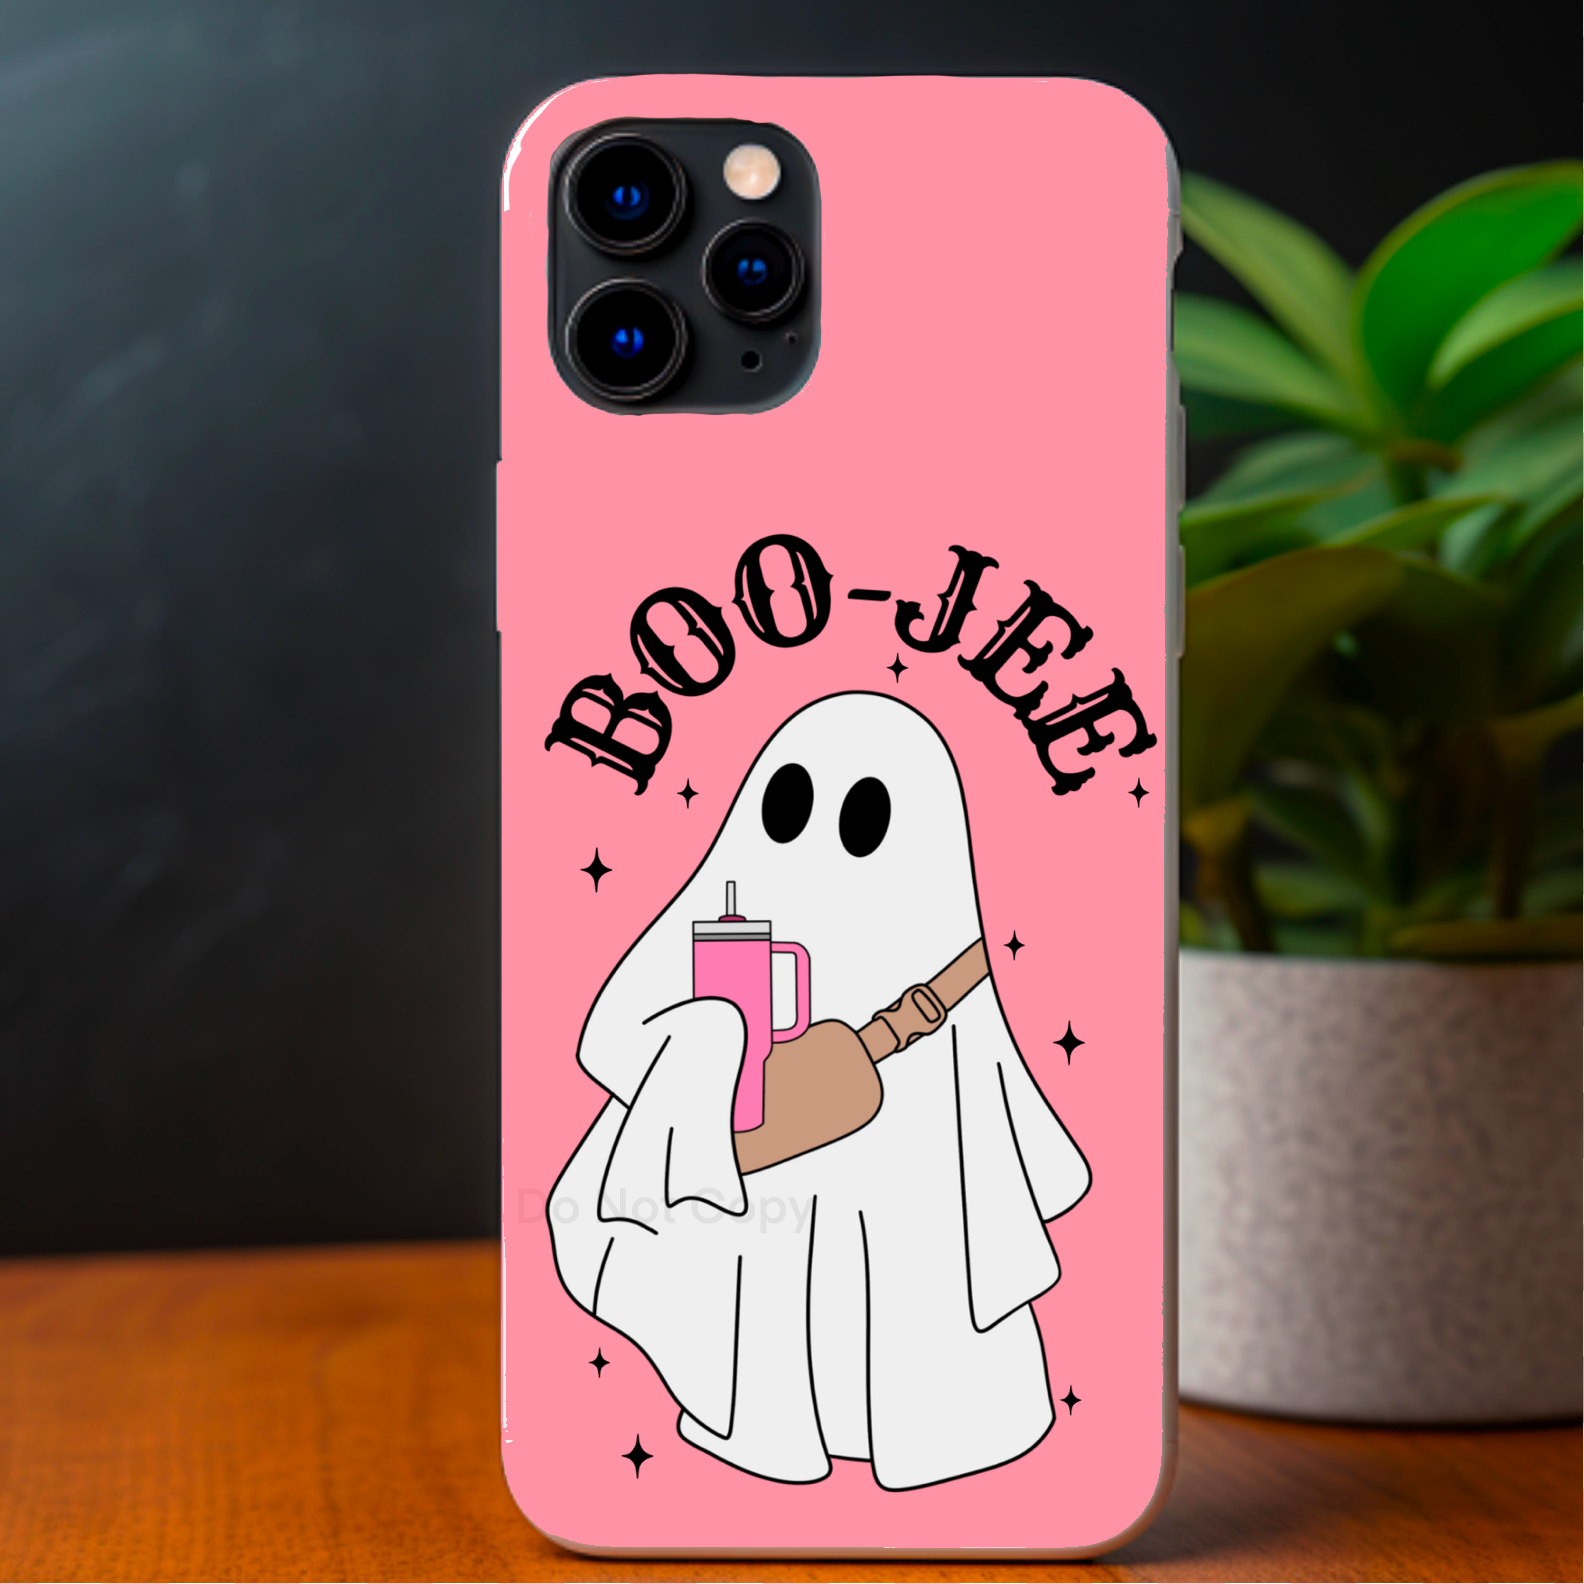 Boo - Jee Phone Sublimation Transfer